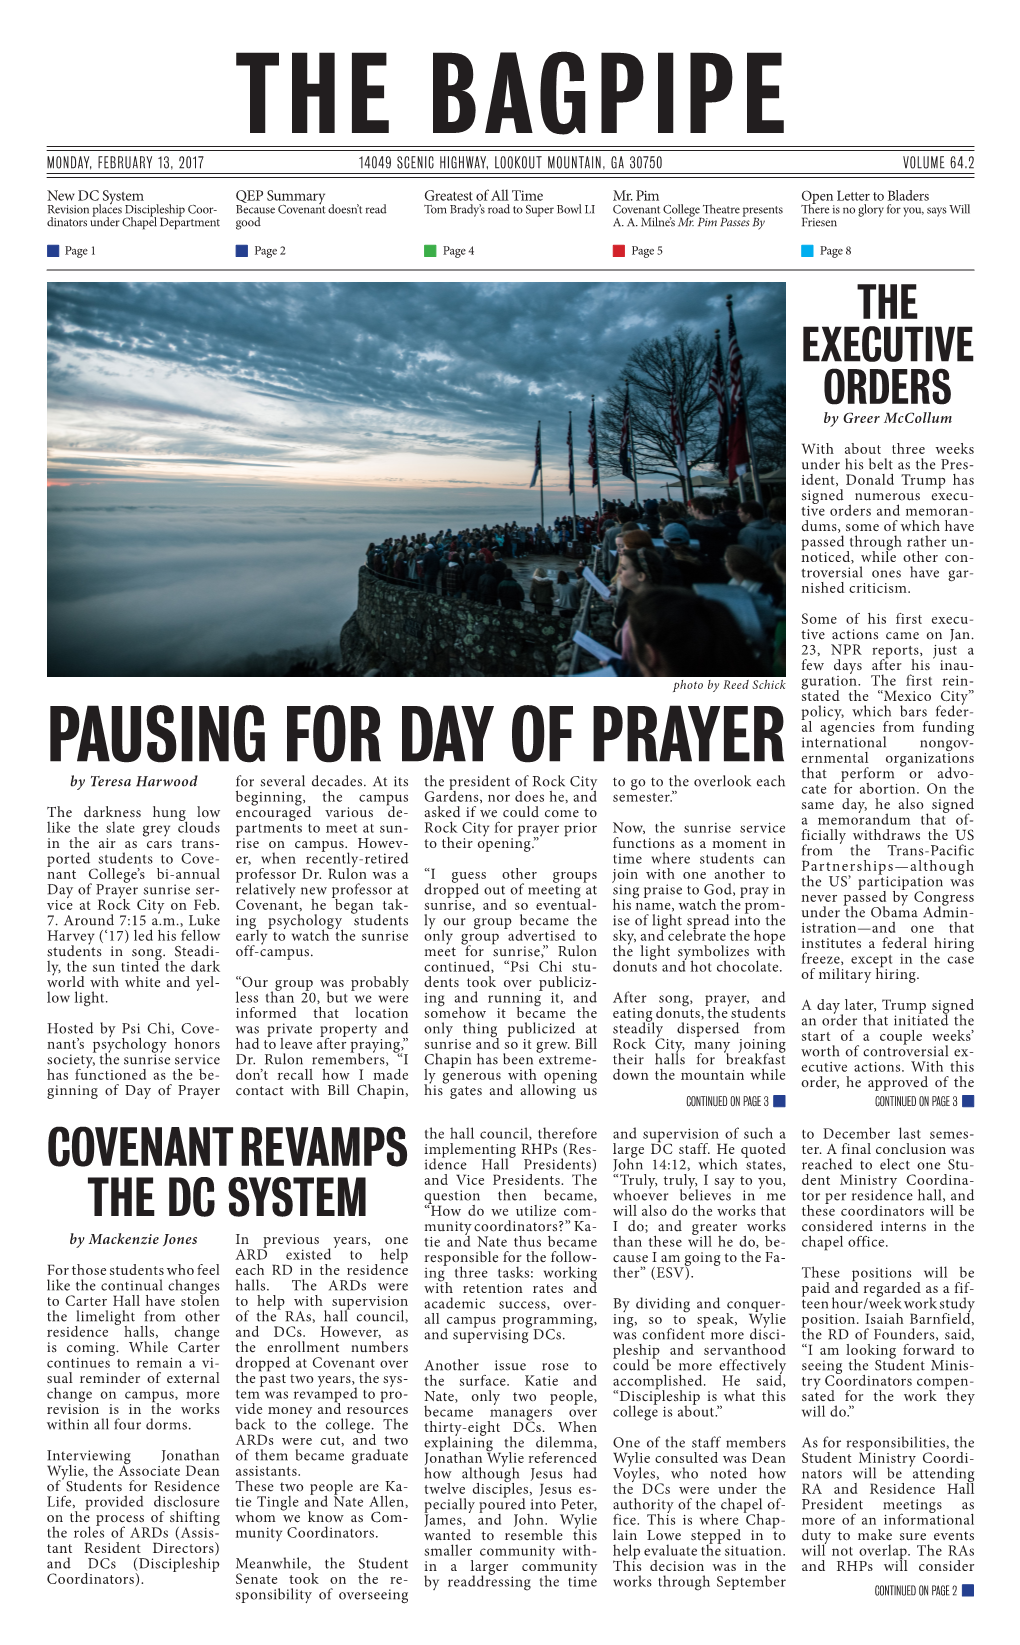 PAUSING for DAY of PRAYER Ernmental Organizations That Perform Or Advo- by Teresa Harwood for Several Decades